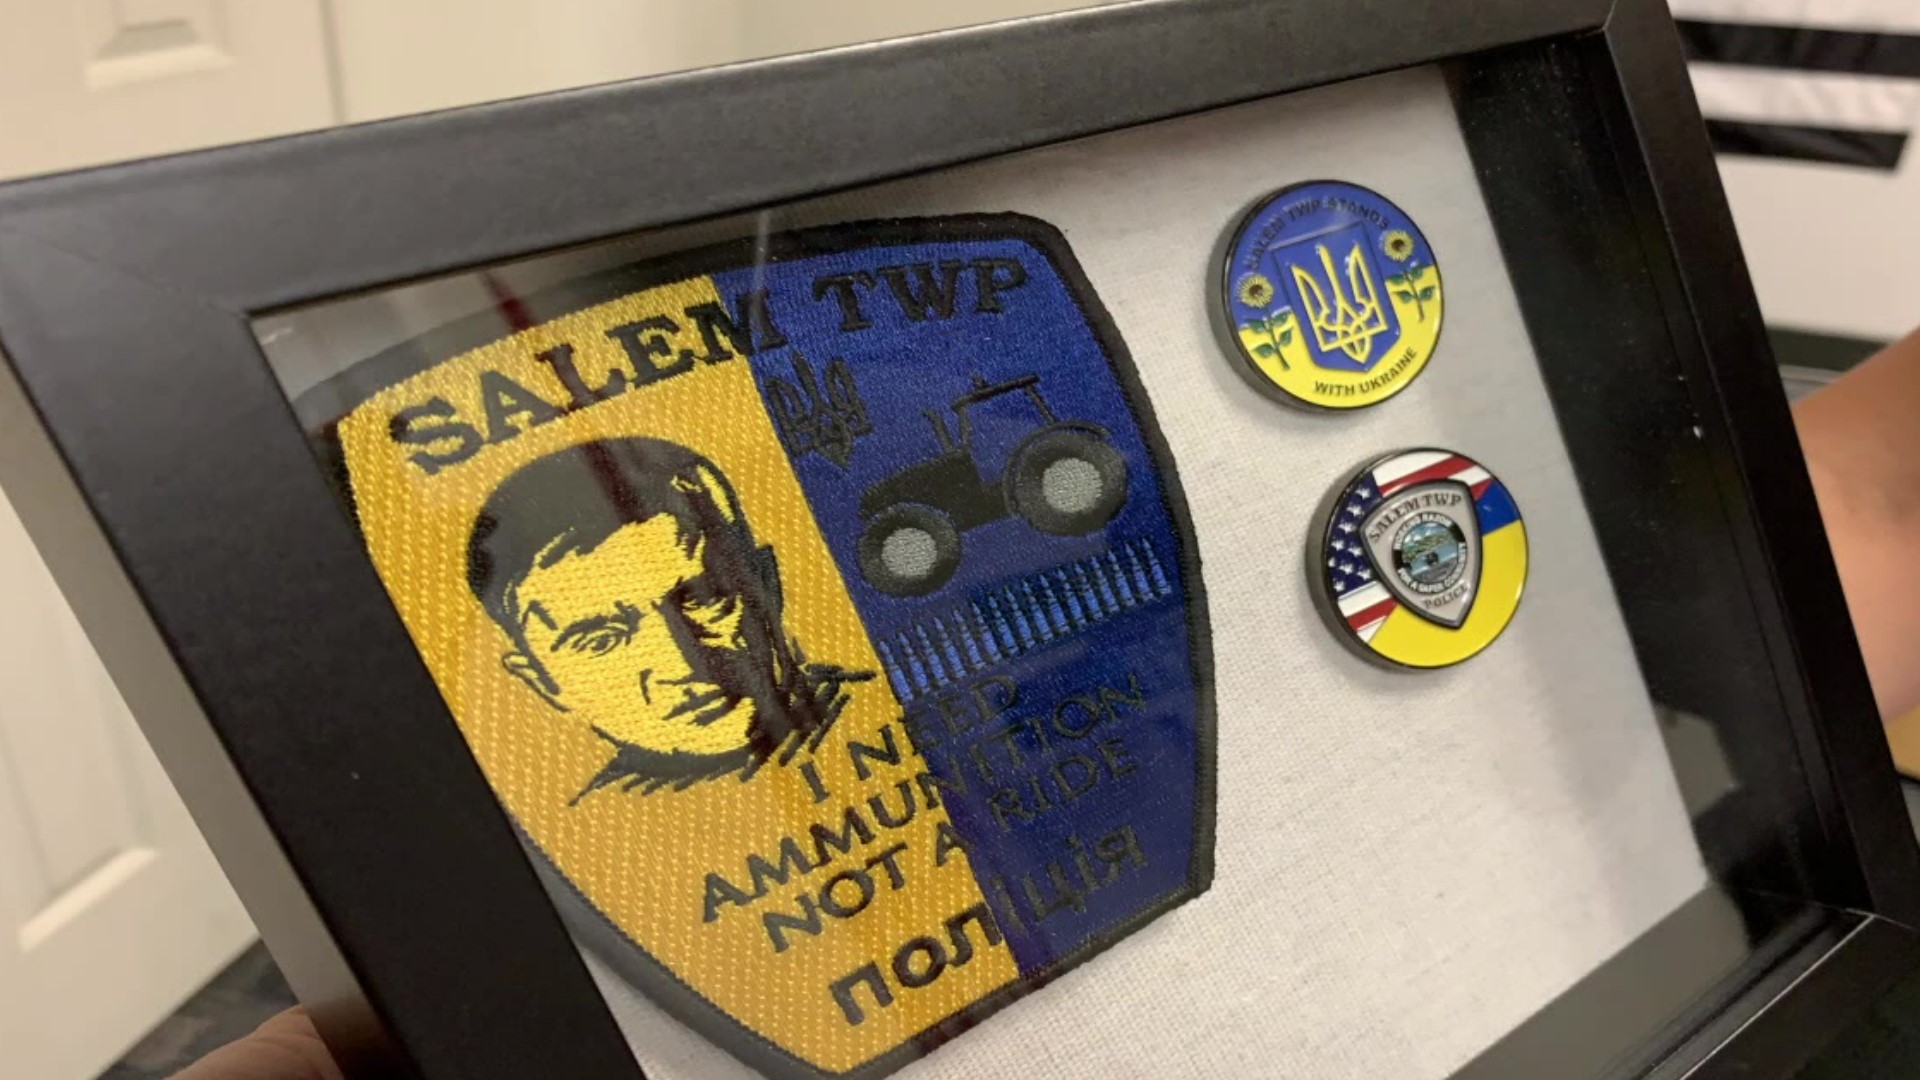 The items were designed by the Salem Township Police Department.